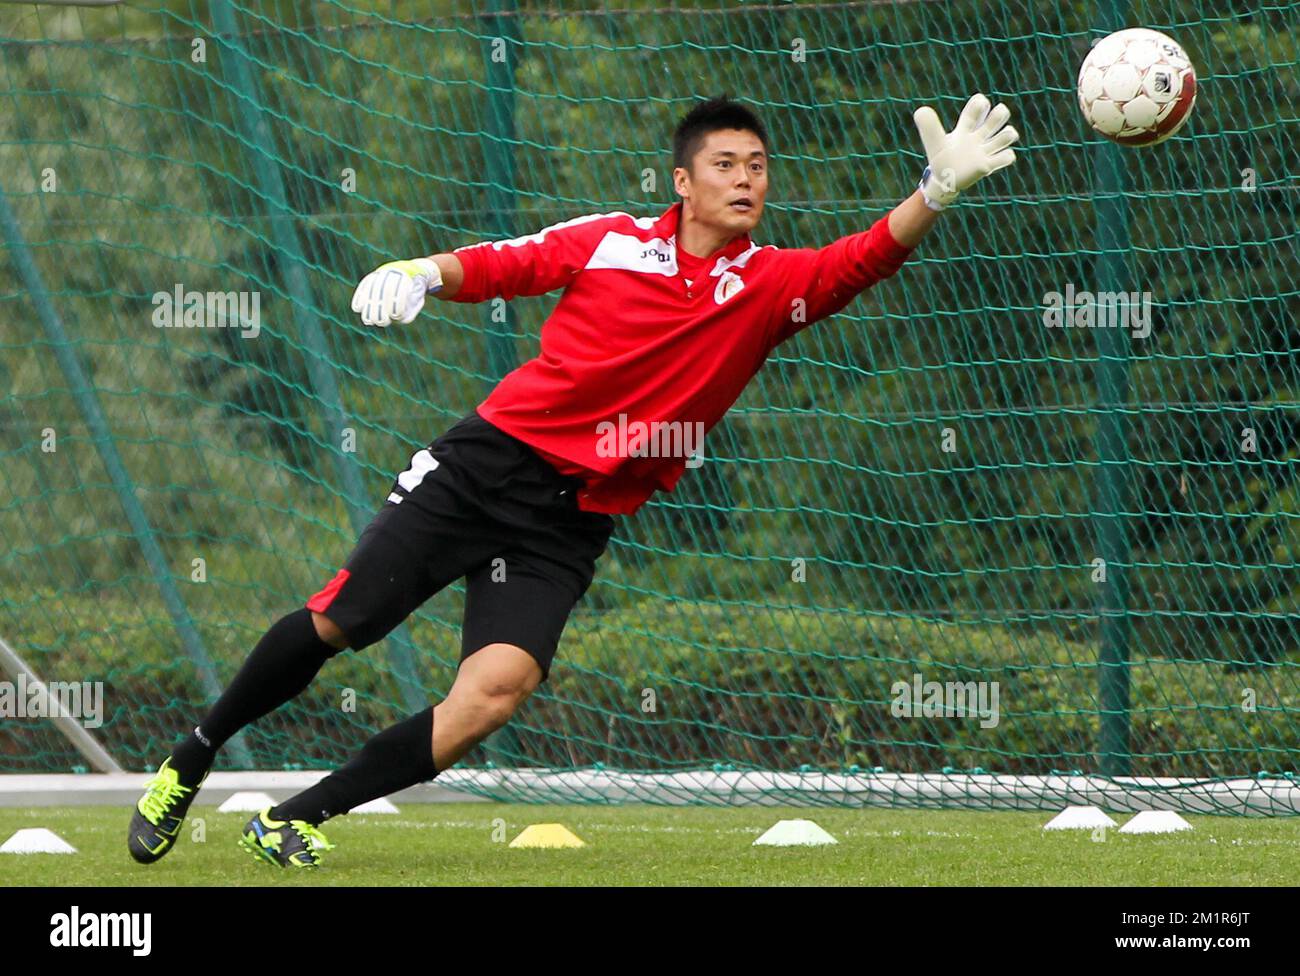 Standard's Eiji Kawashima pictured during a training session of Belgian first division soccer team Standard de Liege, Thursday 11 July 2013 in Liege.  Stock Photo